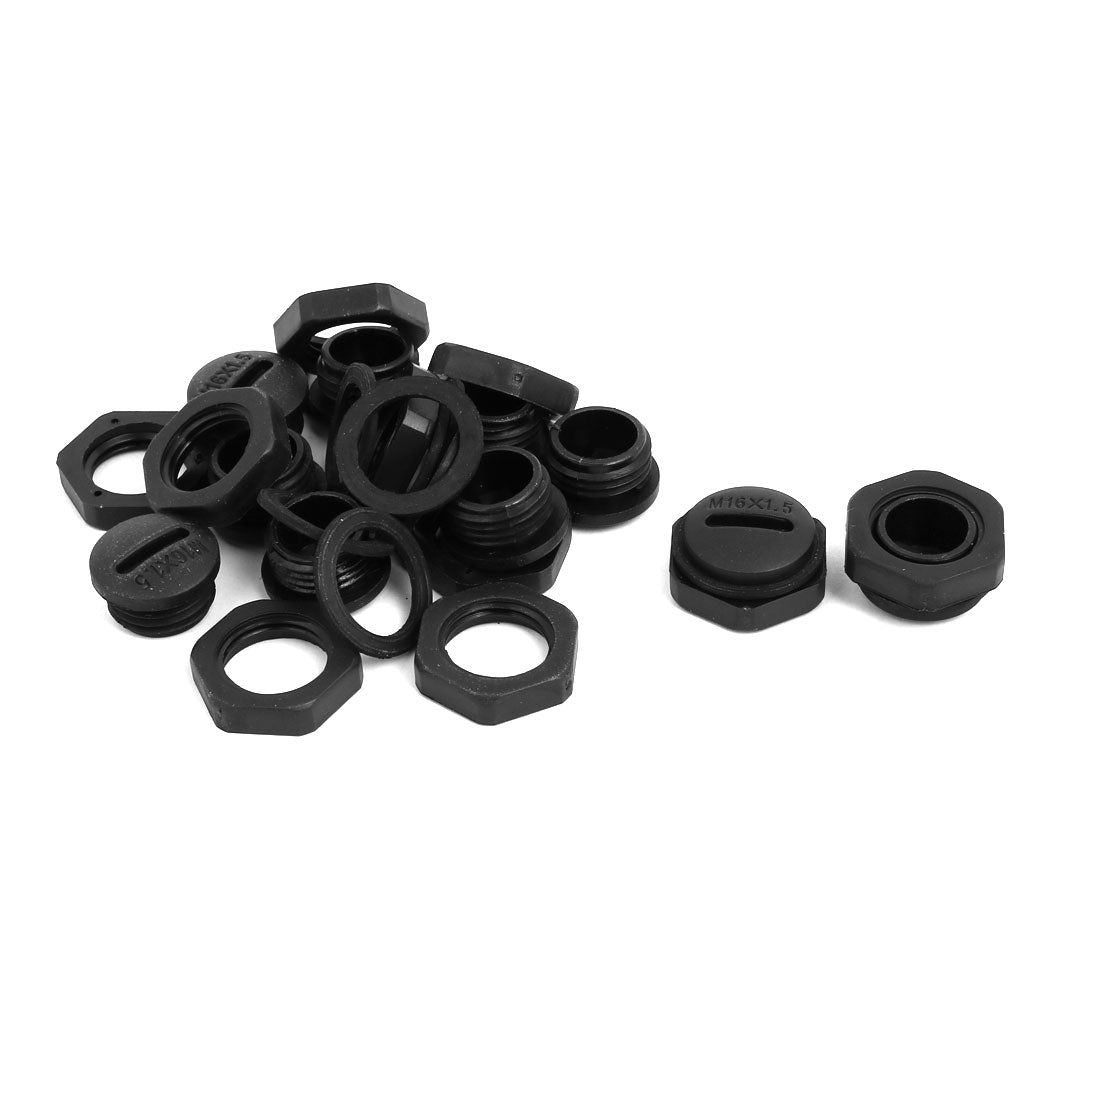 uxcell Uxcell M16 Nylon Male Threaded Cable Gland Screw End Cap Cover Black 10pcs